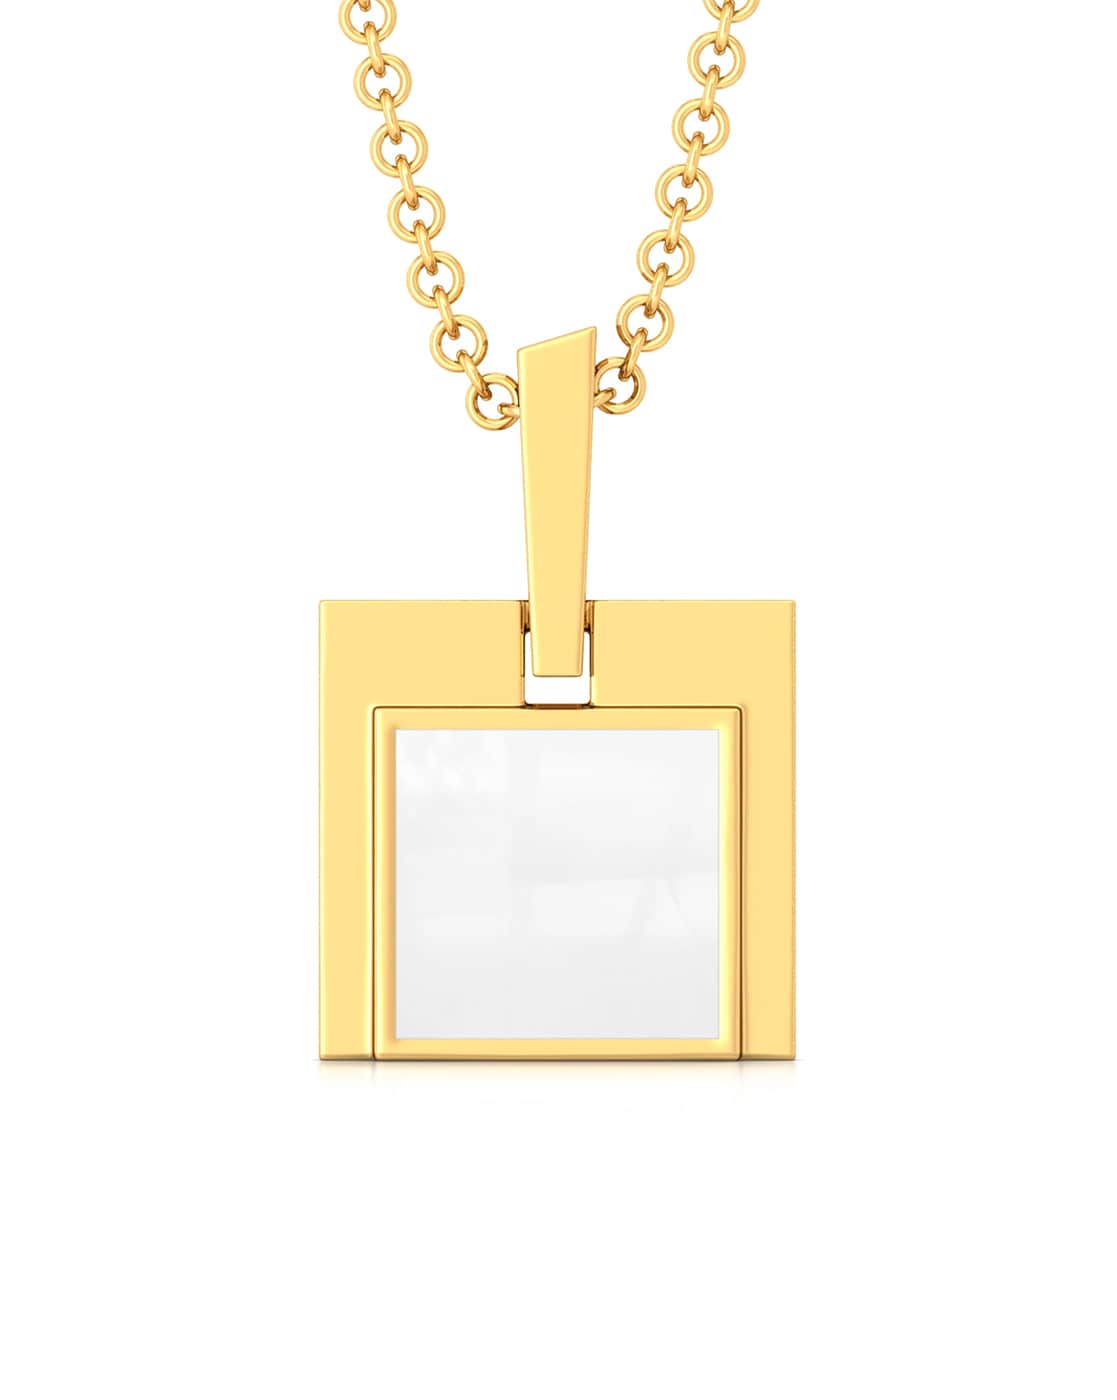 Personalized Gold Square Initials Pendant Necklace - Personalized gift -  Nadin Art Design - Personalized Jewelry